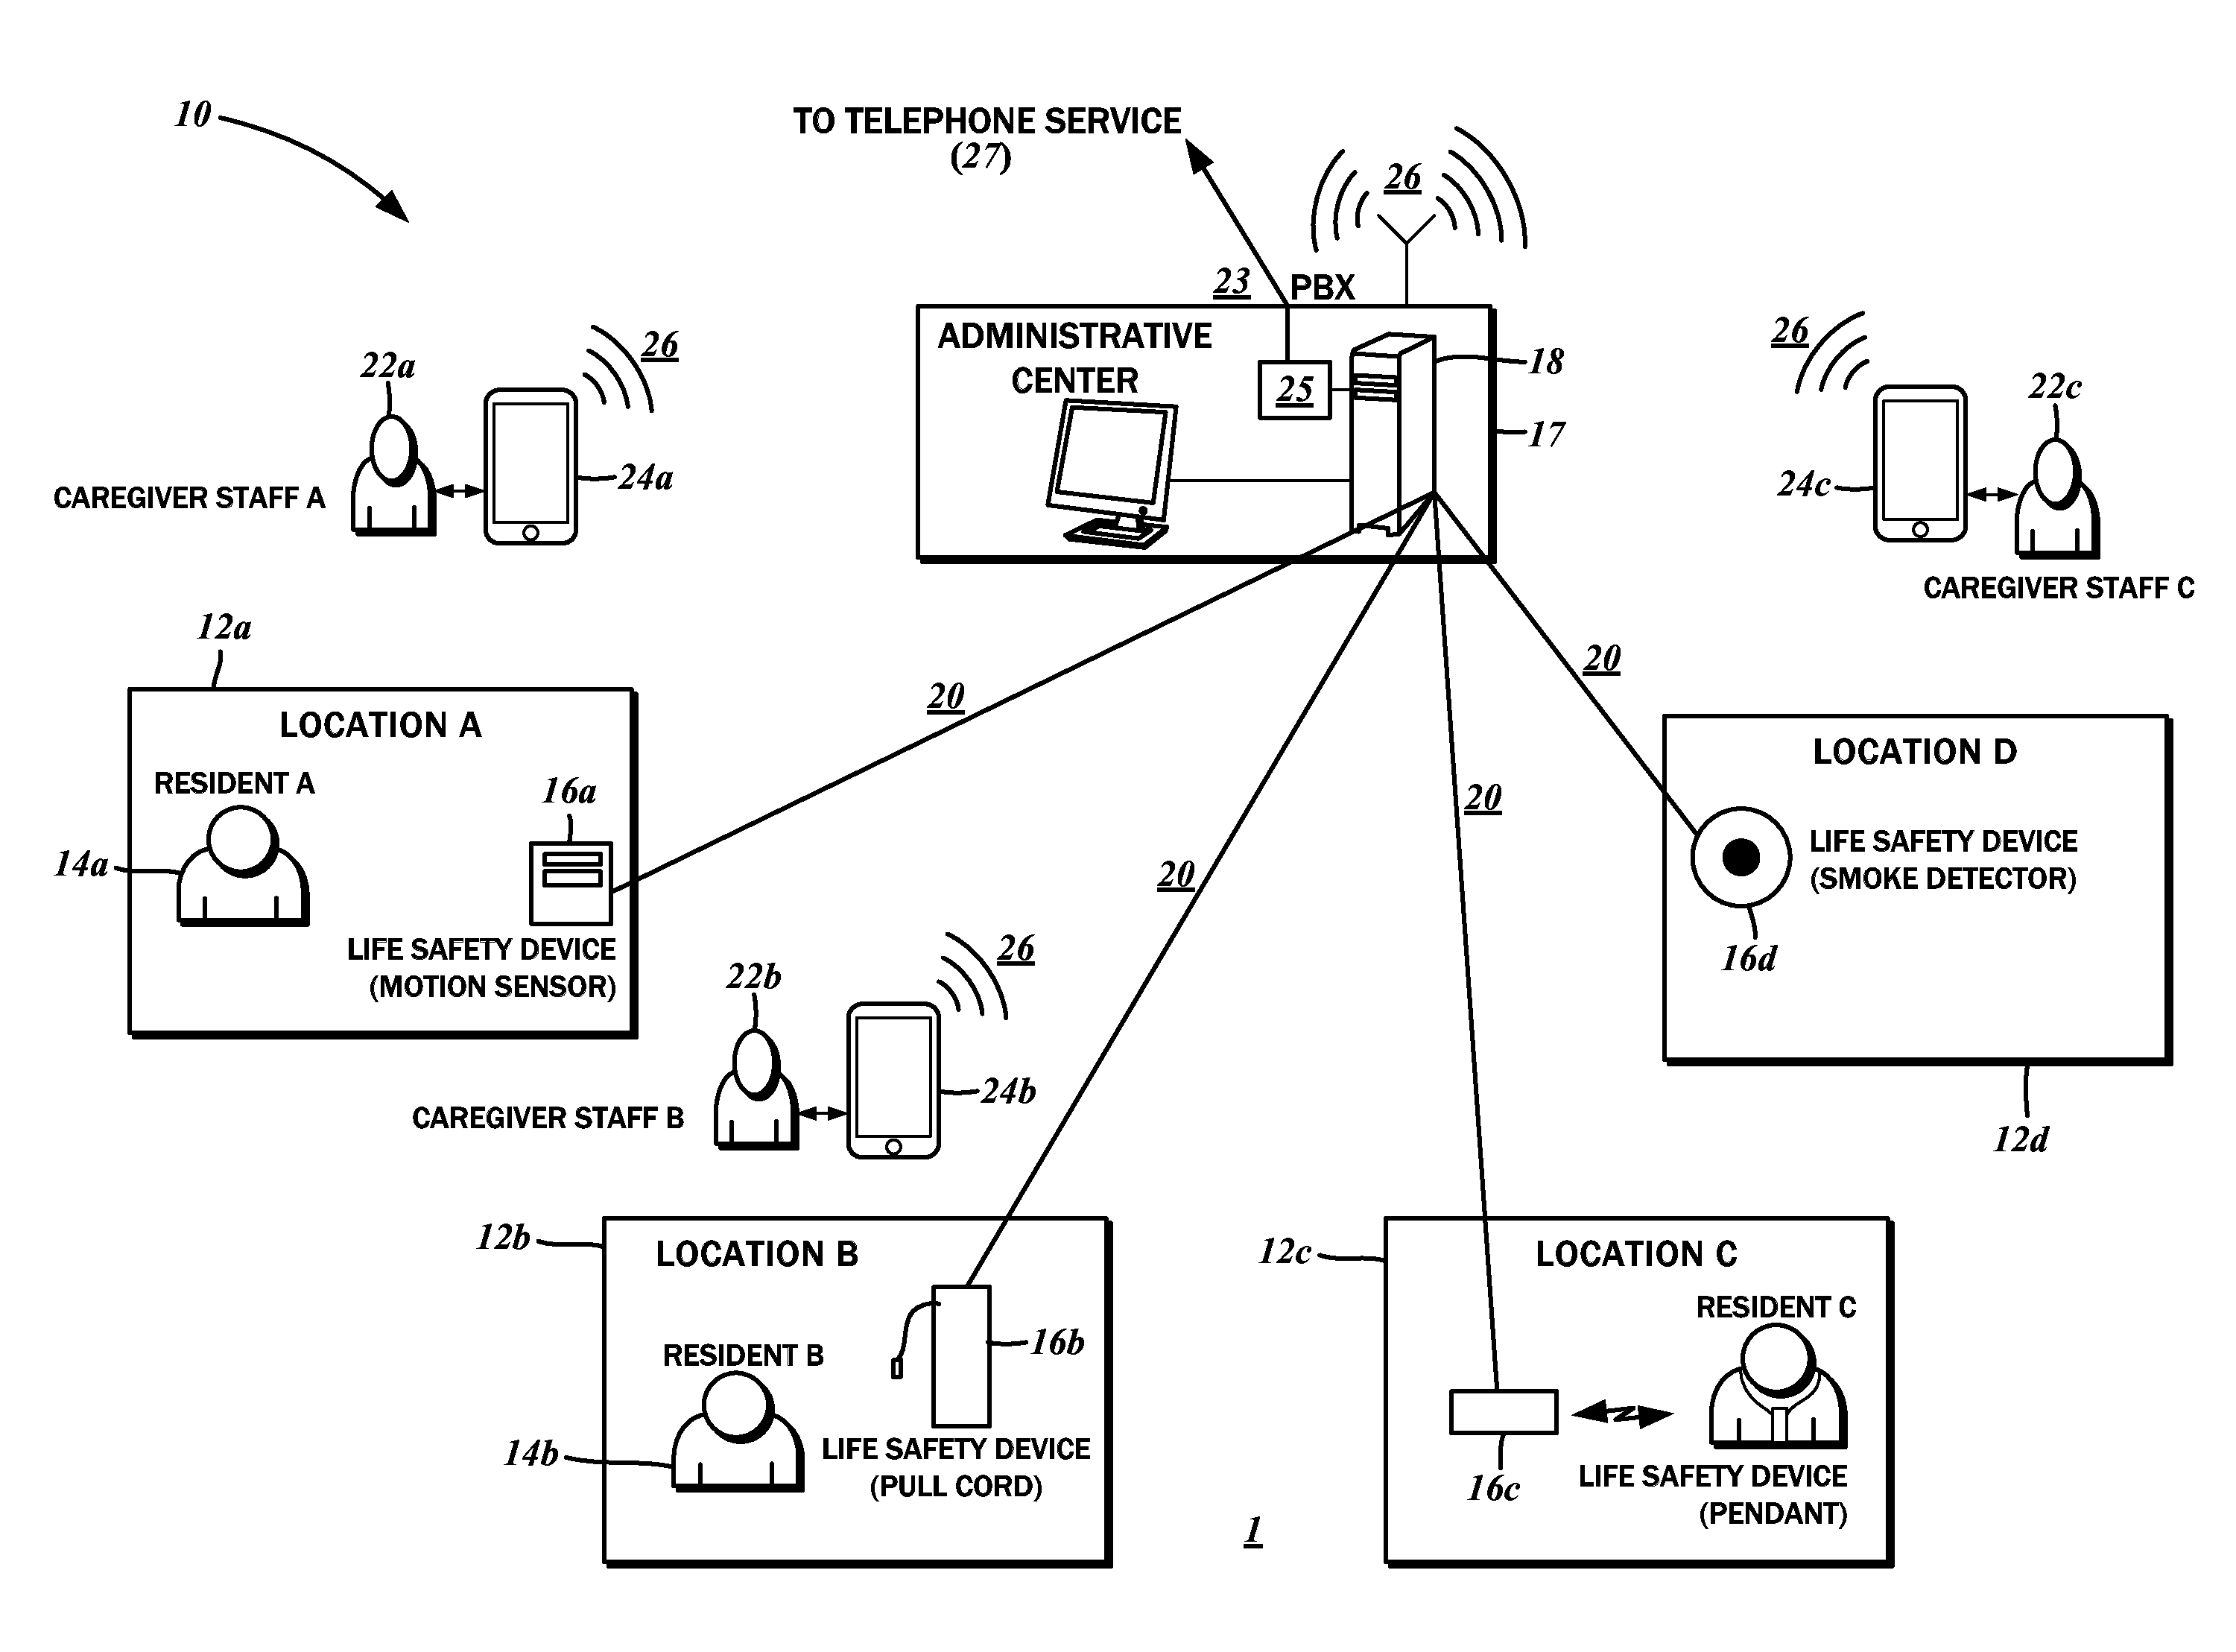 Interactive wireless life safety communications system